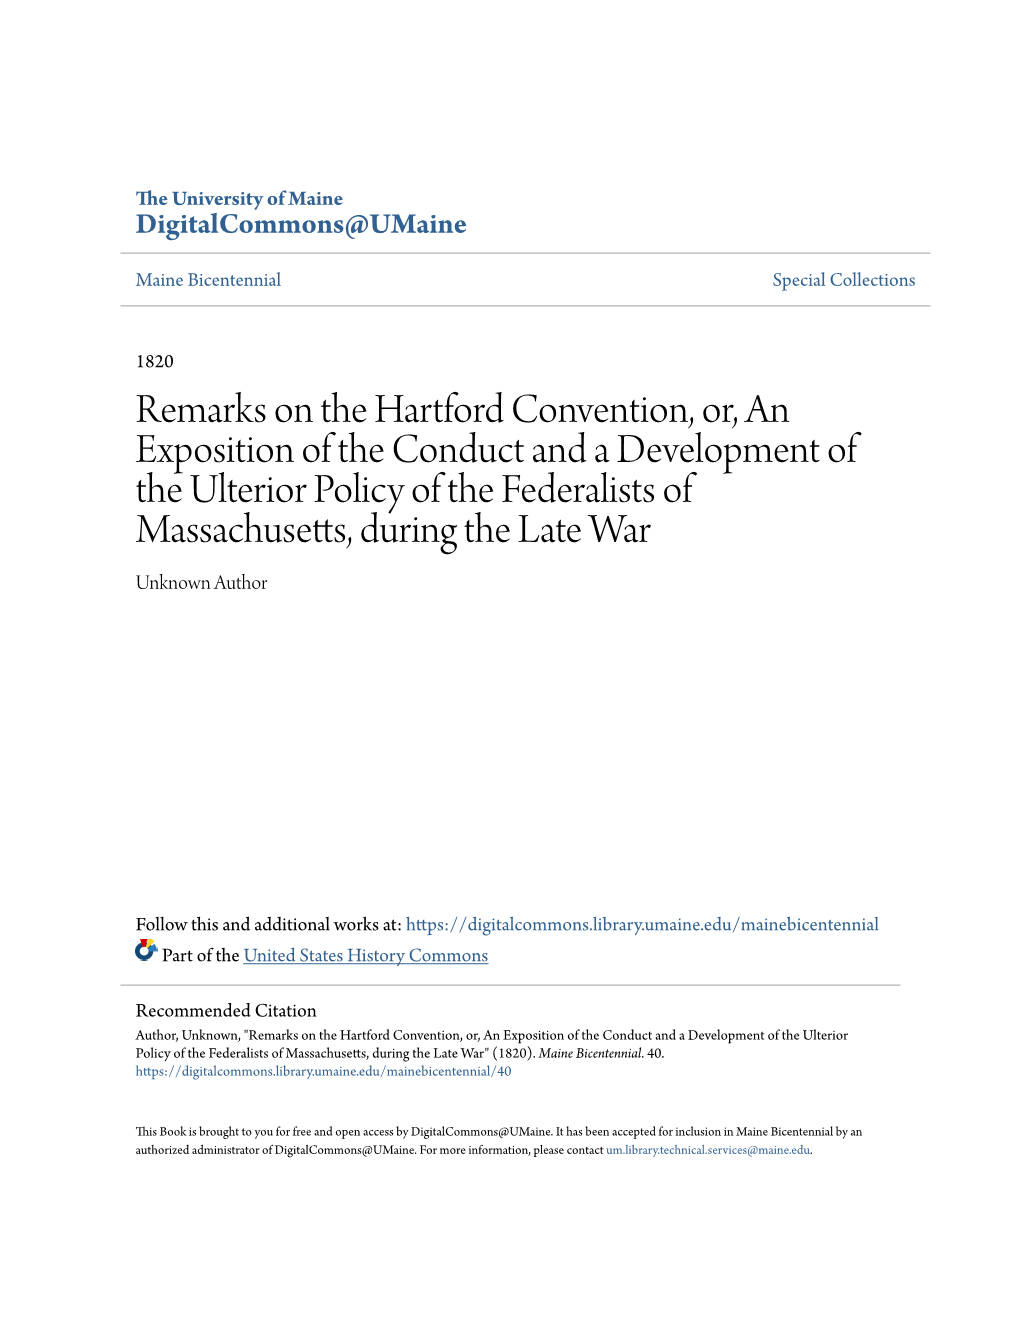 Remarks on the Hartford Convention, Or, an Exposition of the Conduct